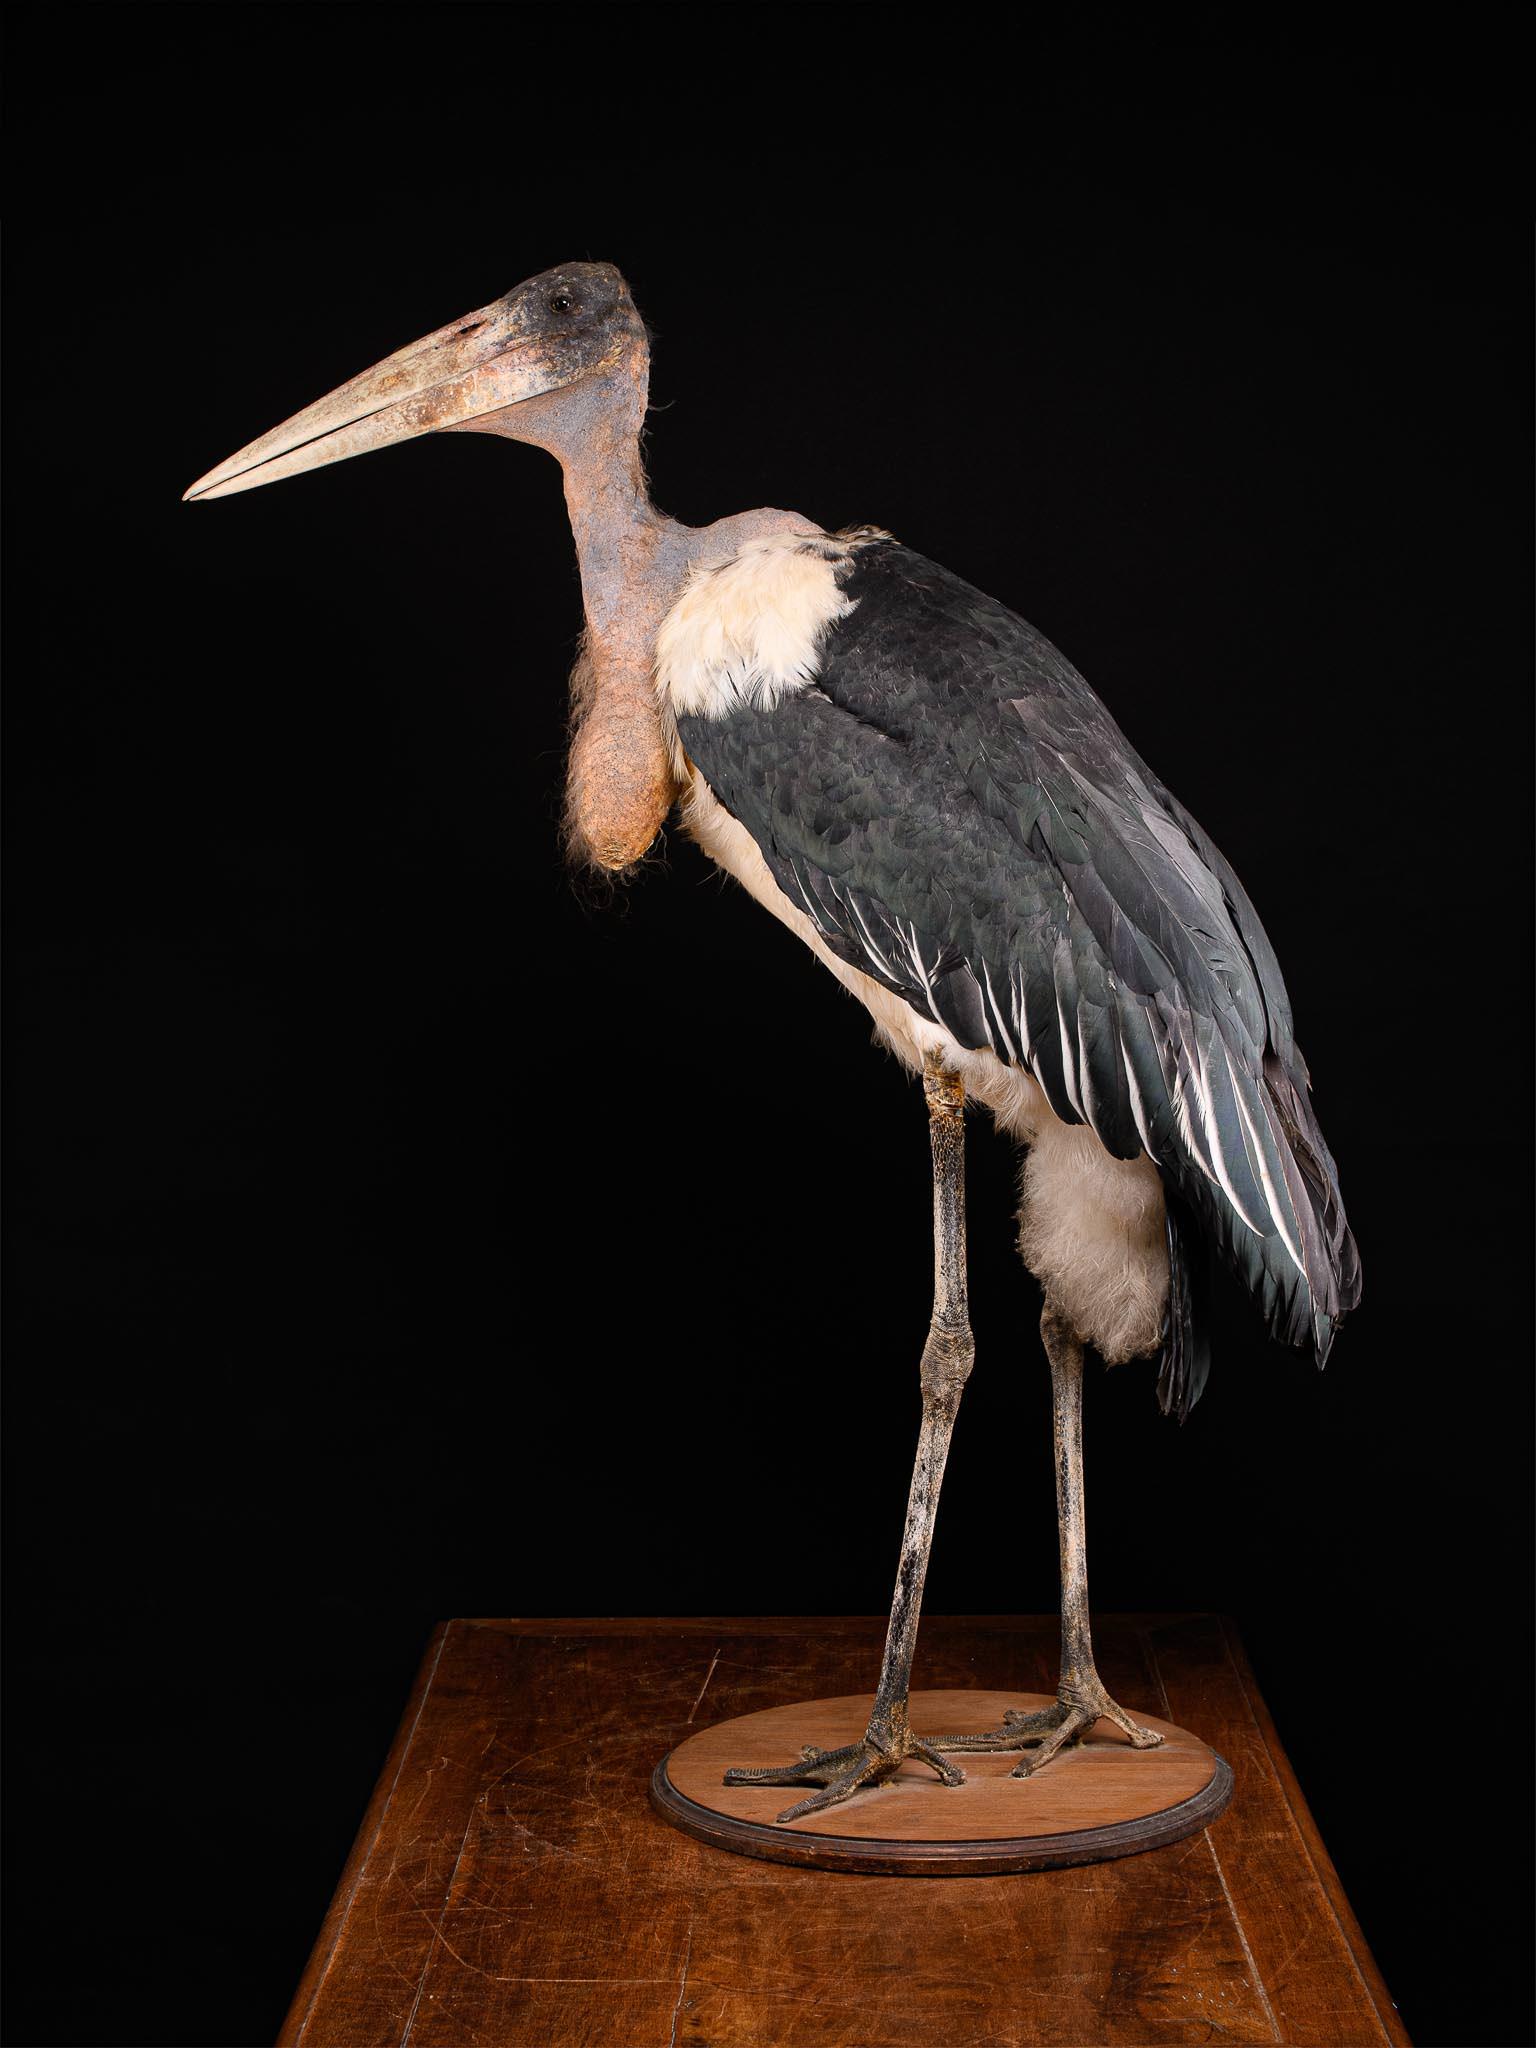 The Marabou Stork is observed in the marshes, lakeshores and rivers of Africa. Its plumage is slate grey and whitish below; it has long legs, and flies folded neck. It lives and feeds into the open arid bush and the wooded savanna. It’s close to